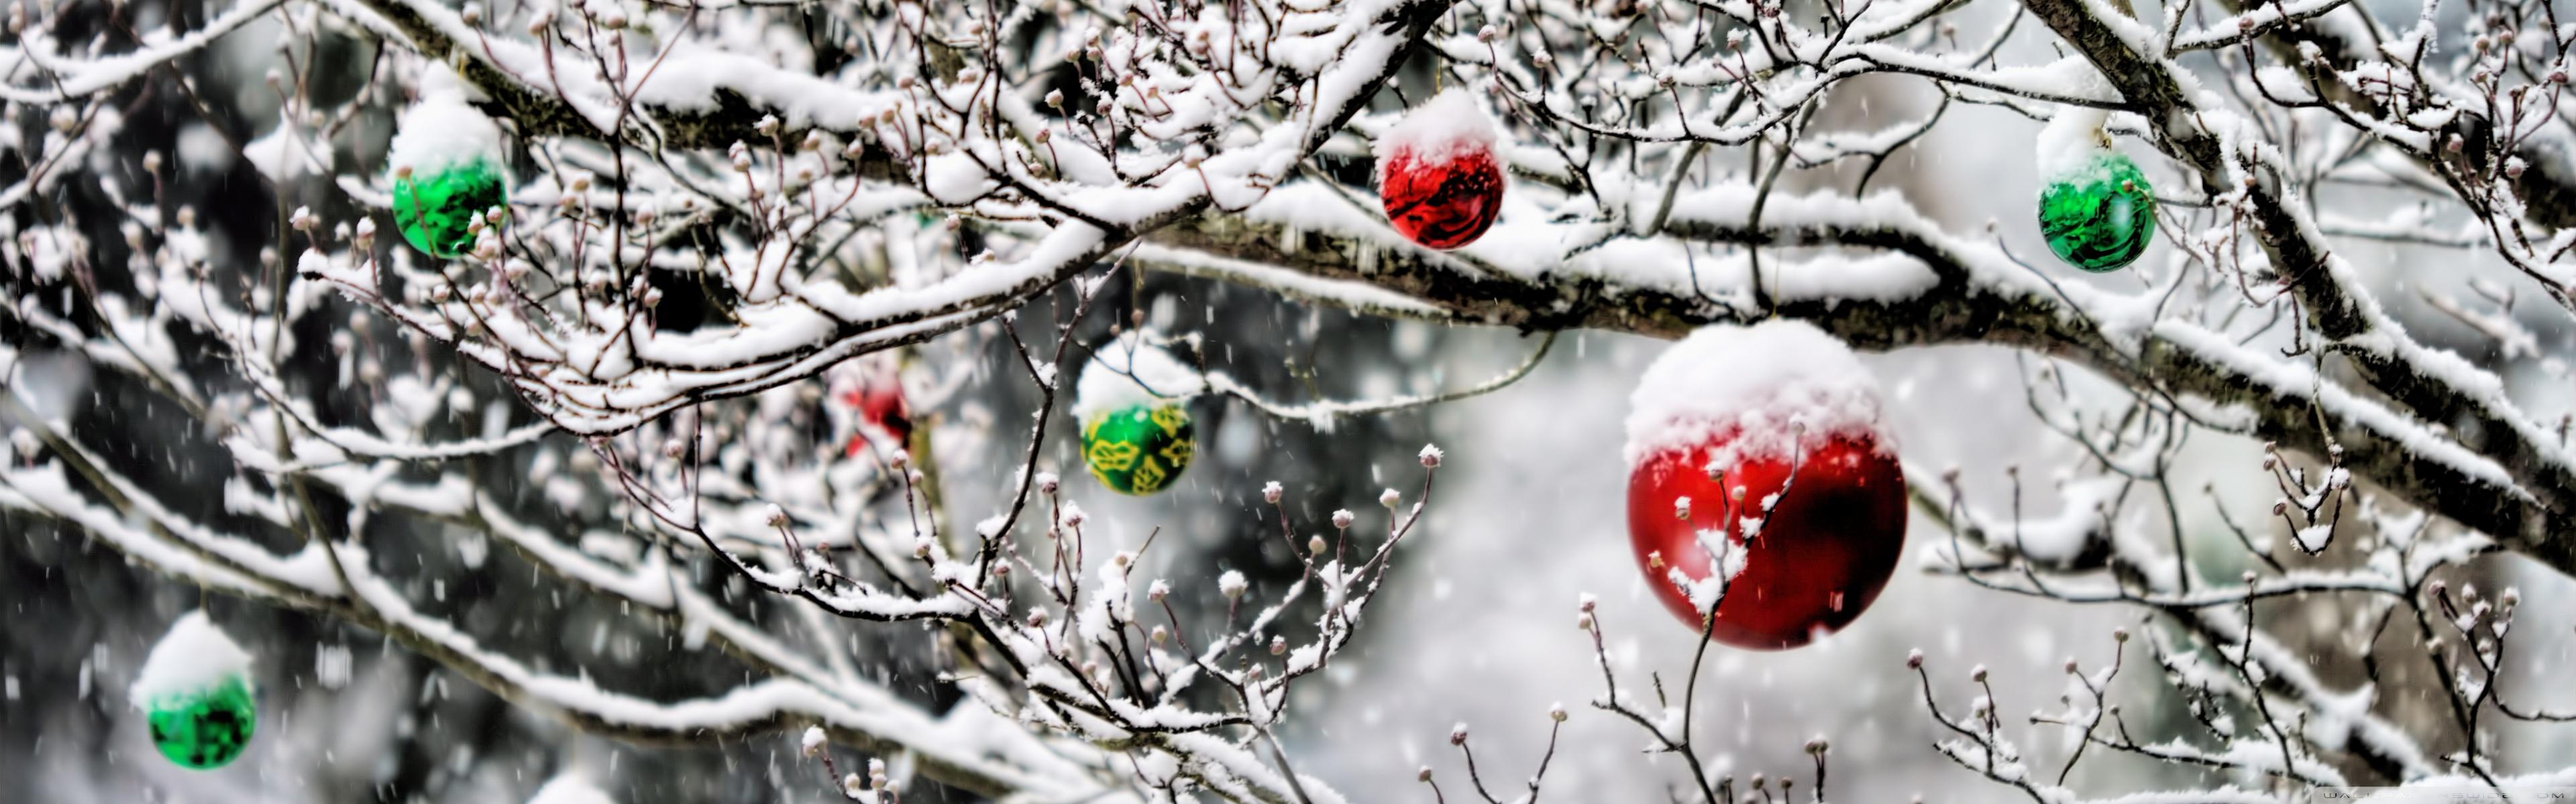 Christmas Ornaments In The Snow Ultra HD Desktop Background